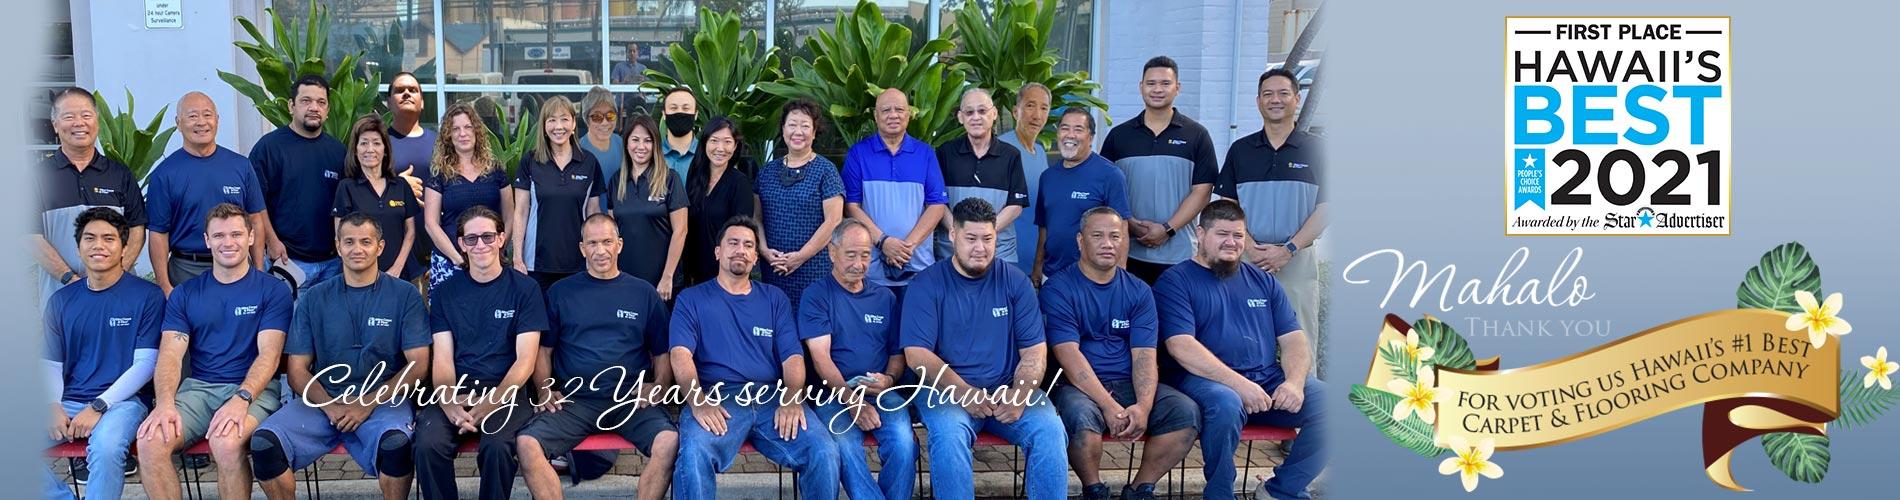 Thank you for voting us Hawaii's #1 best carpet and flooring company!